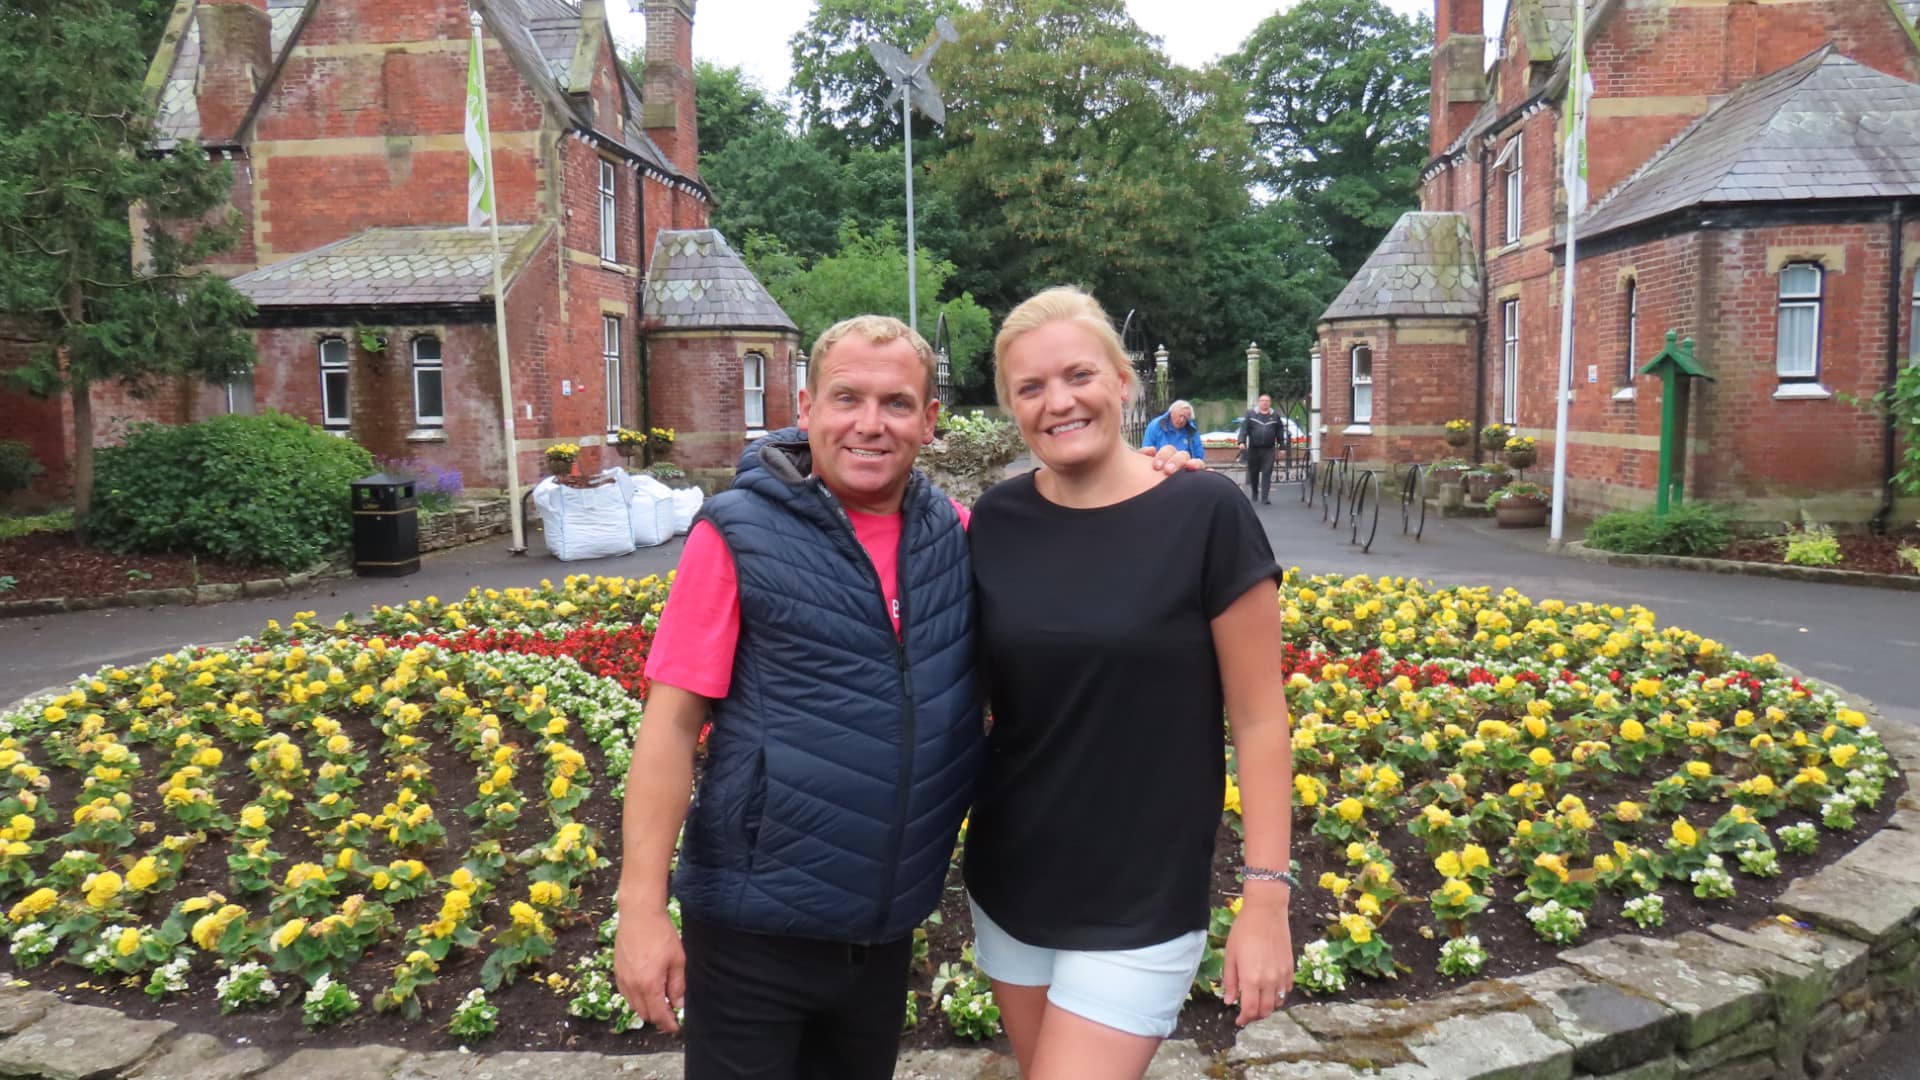 Visitors enjoy the Botanic Gardens Family Fun Day in Southport. Make A Change For Botanic founder David Rawsthorne (left) and Botanic Gardens Family Fun Day organiser Jess Rickers (right). Photo by Andrew Brown Stand Up For Southport